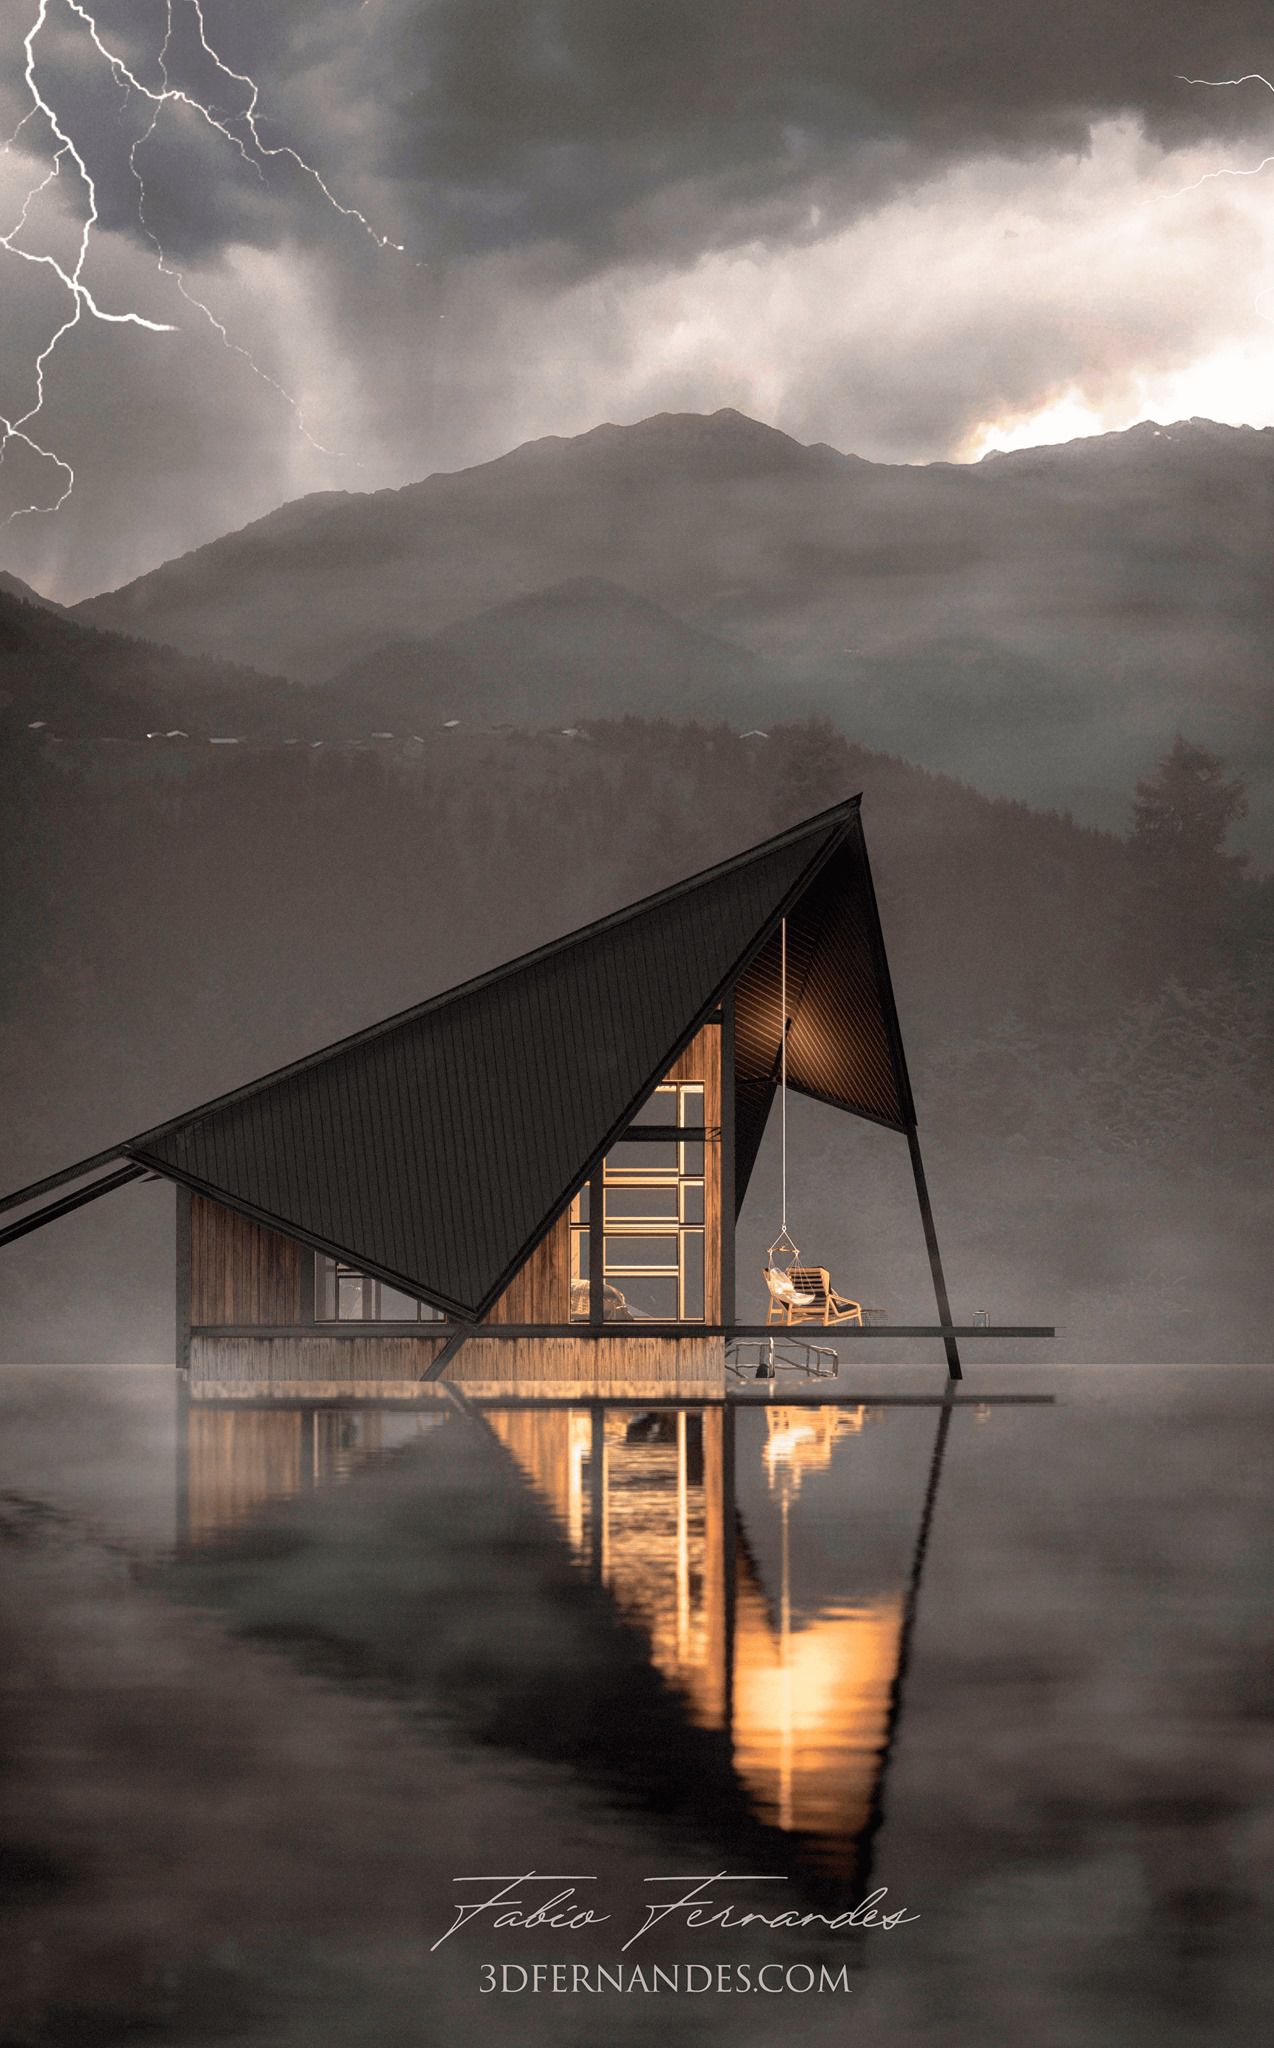 Cabin on the lake, rendered in Lumion 11.3 by Fabio Fernandes.